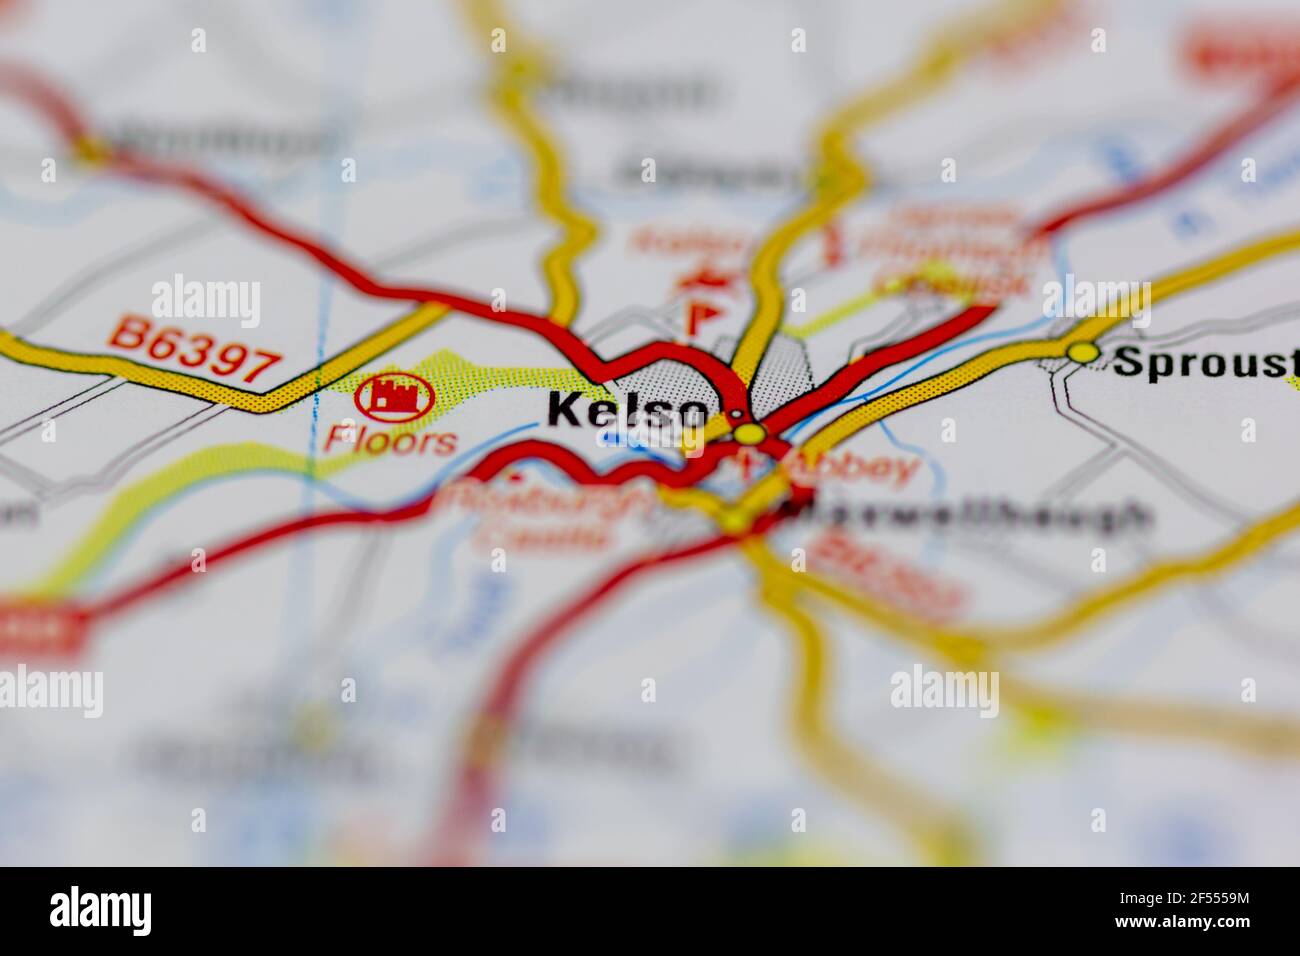 Kelso Shown on a Geography map or road map Stock Photo